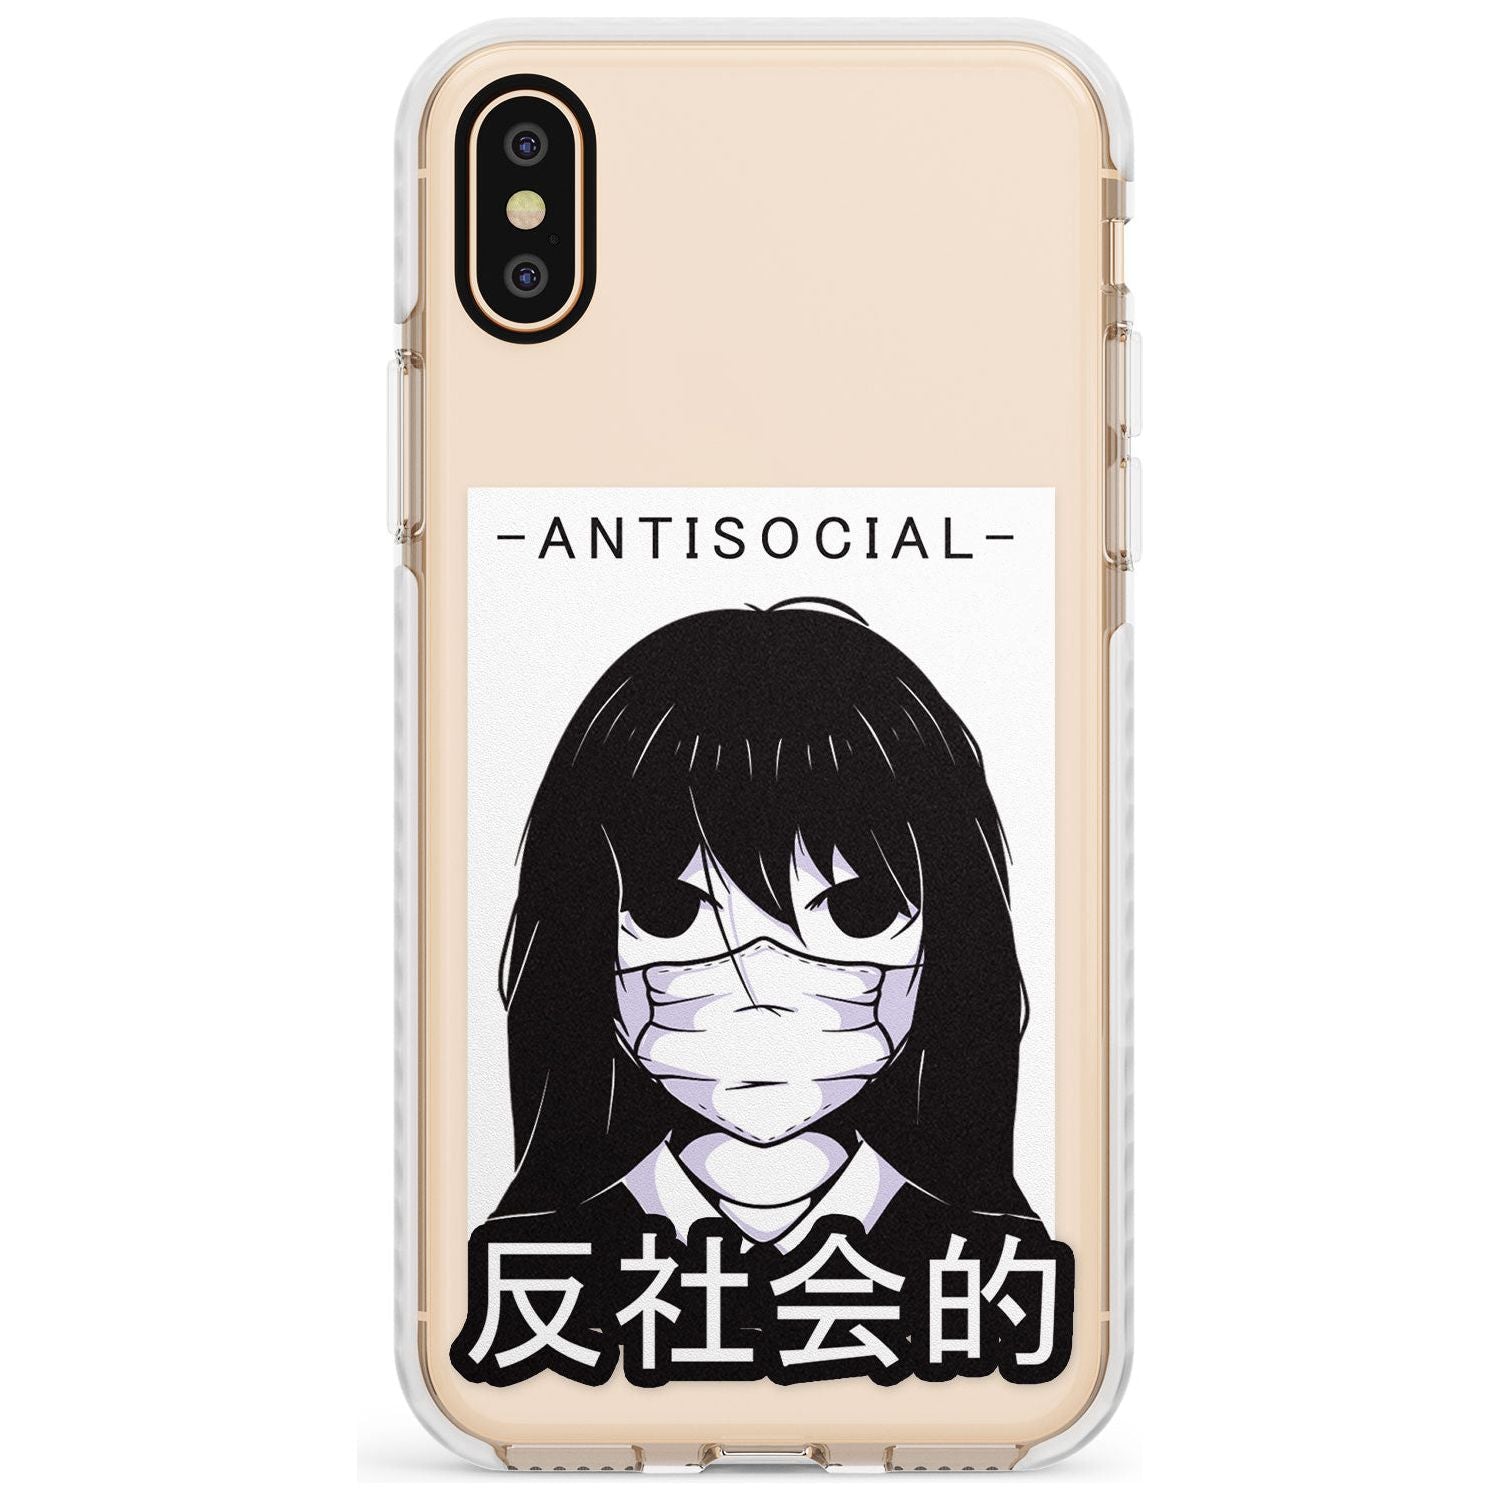 Anti-Social Impact Phone Case for iPhone X XS Max XR